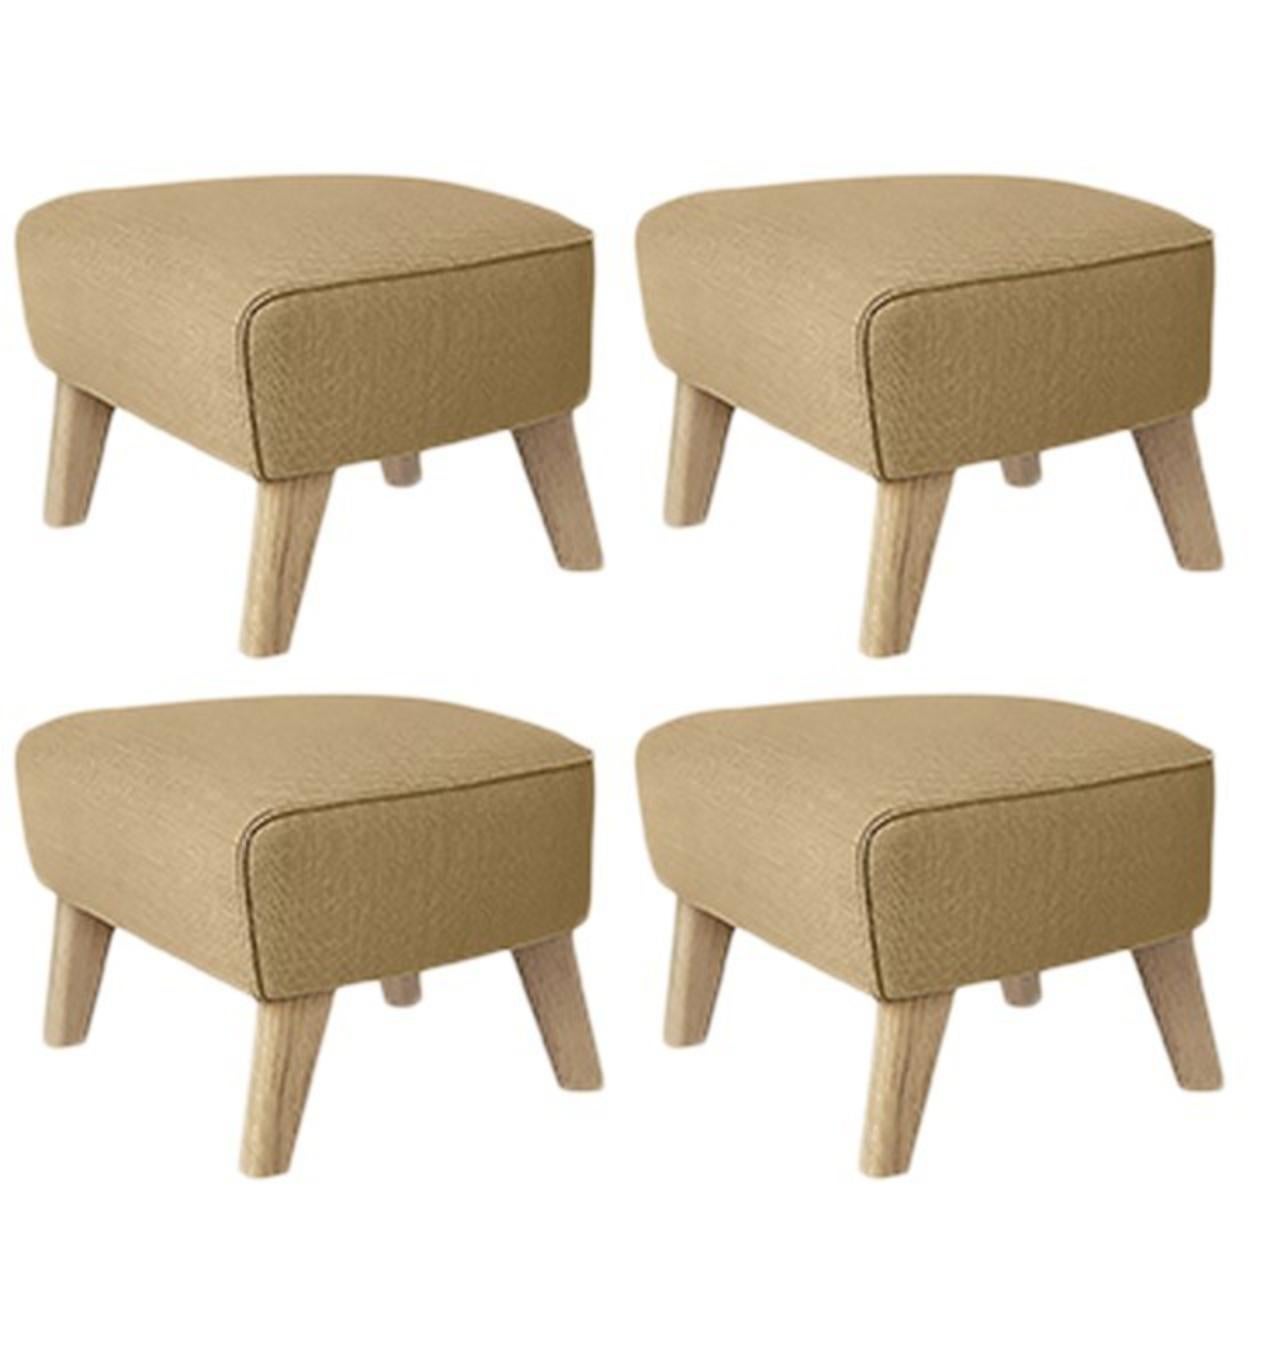 Set of 4 sand, natural oak Raf Simons Vidar 3 My Own Chair footstool by Lassen
Dimensions: W 56 x D 58 x H 40 cm 
Materials: Textile
Also available: other colors available.

The My Own Chair Footstool has been designed in the same spirit as